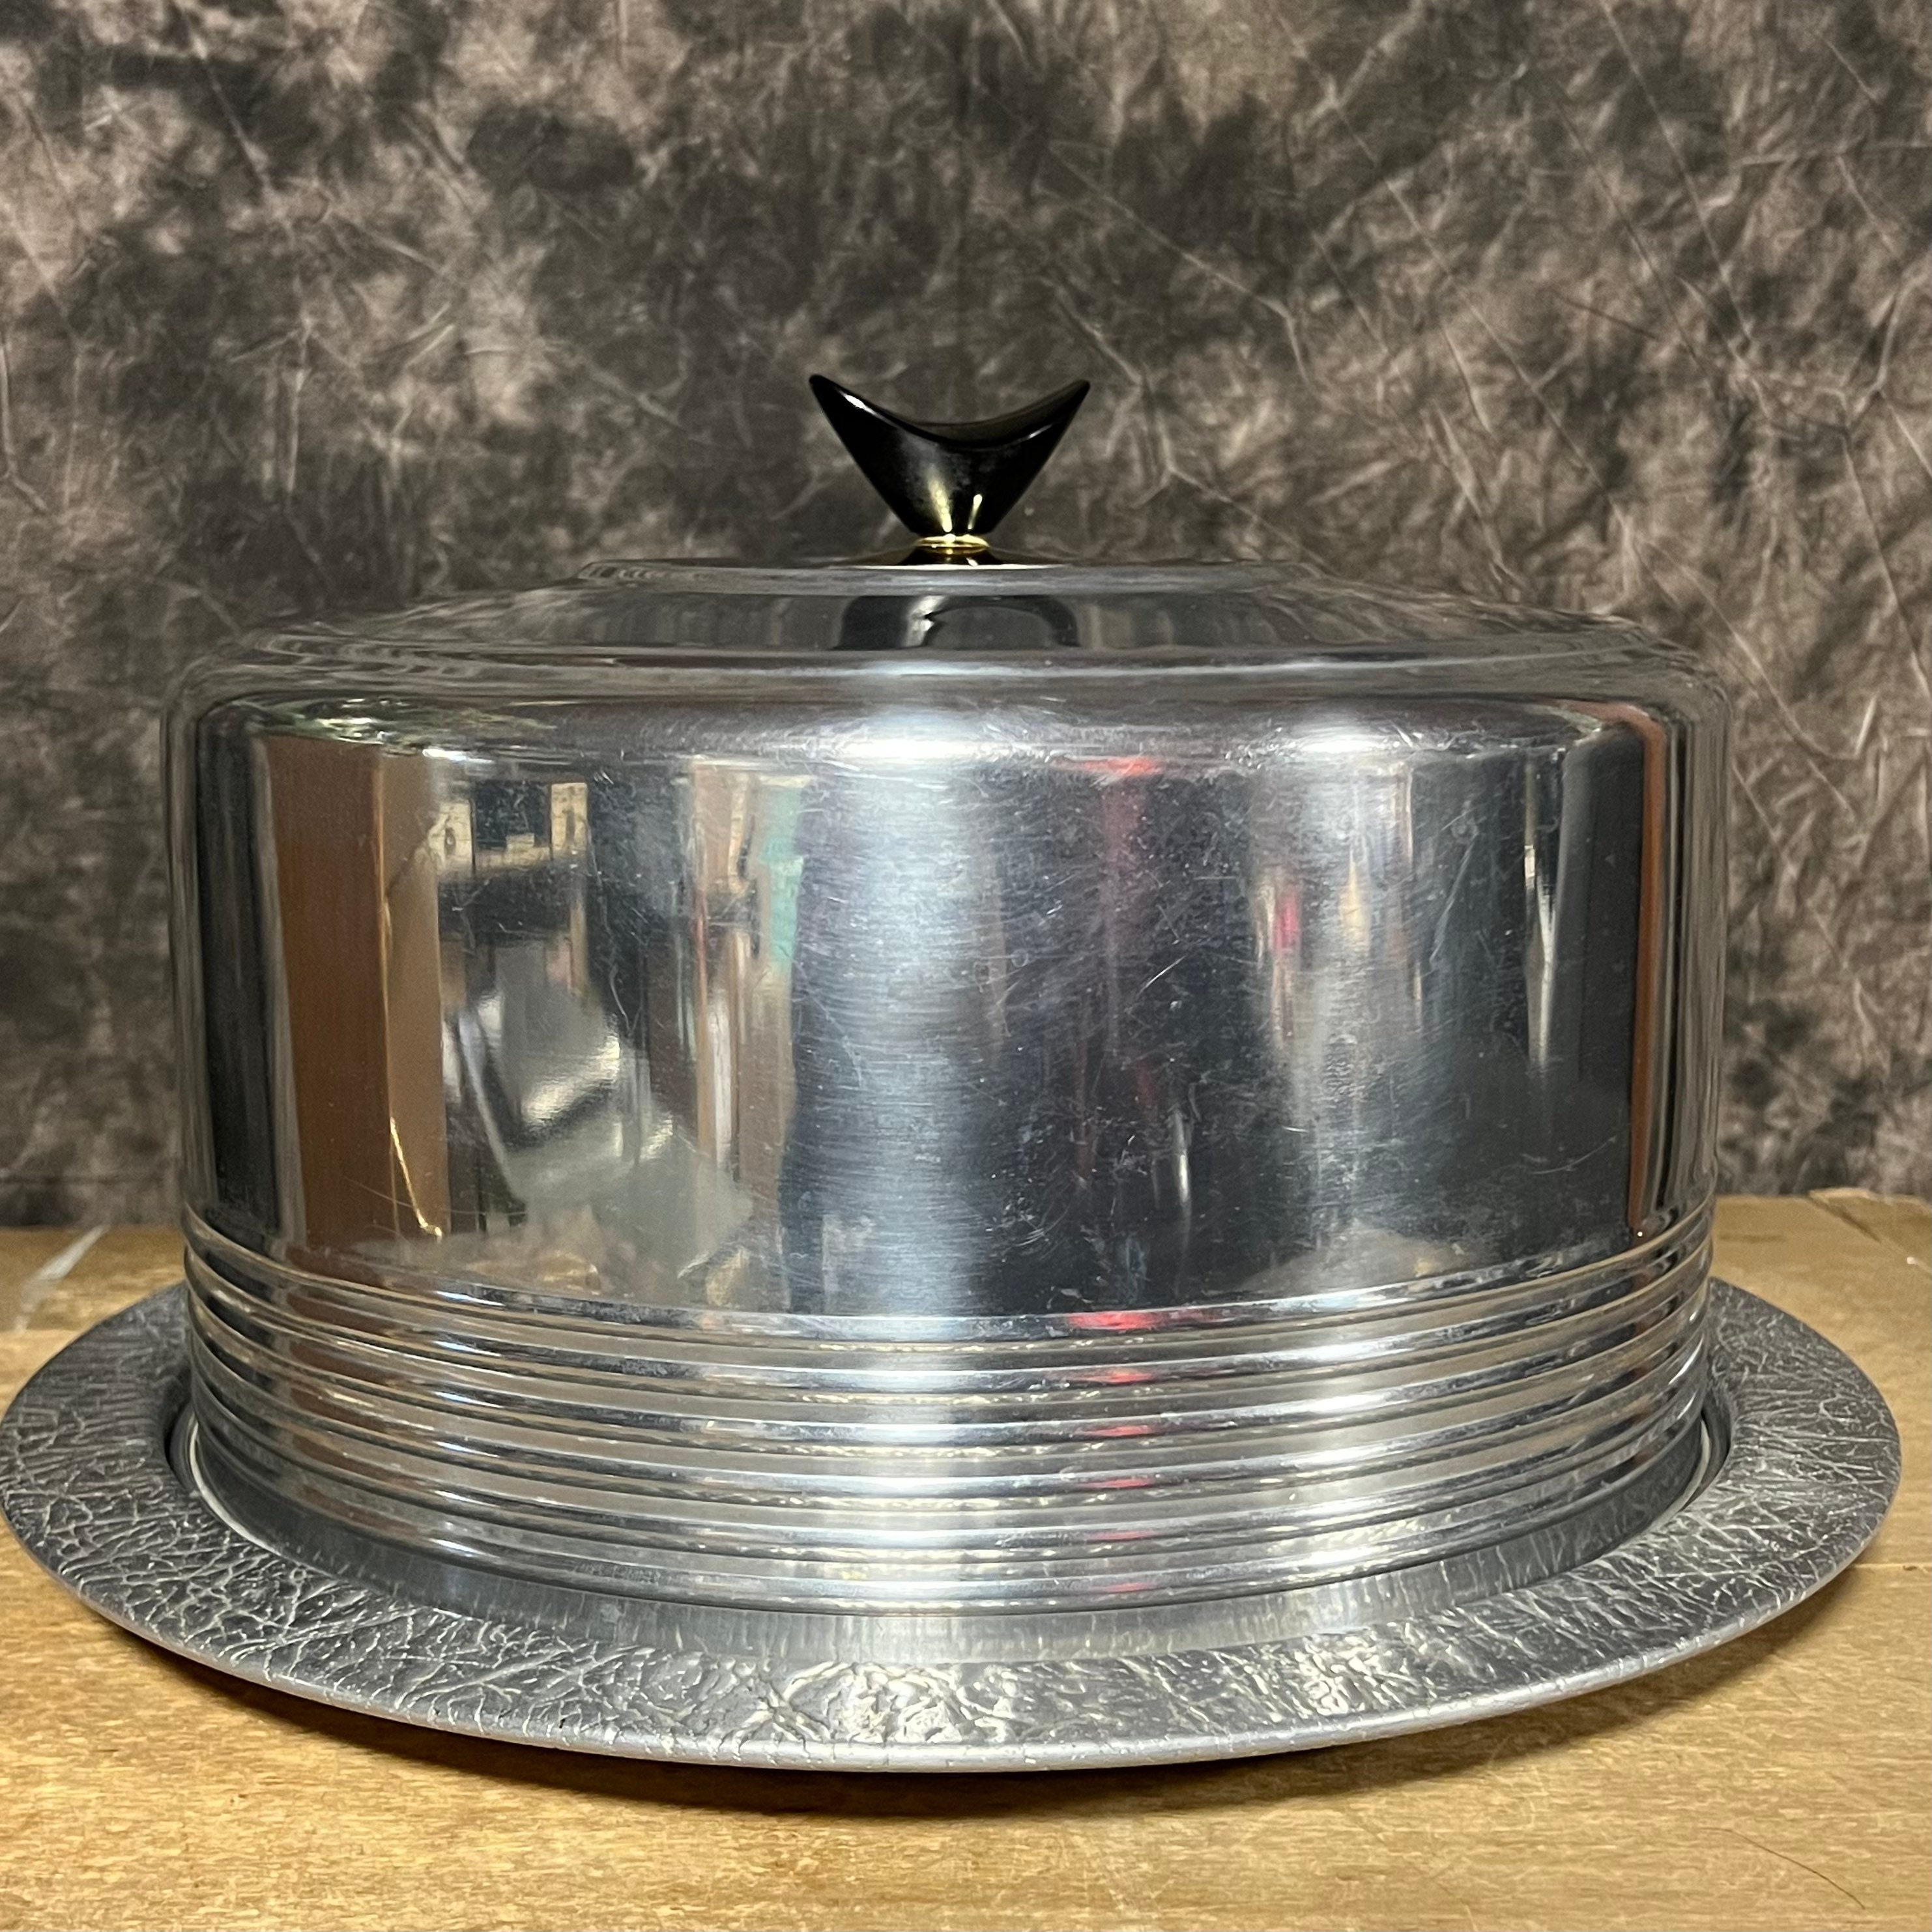 Vintage 10” X 4.5” Metal Cake Cover Carrier Lid Gold & White W/ Insert Tray  Pan